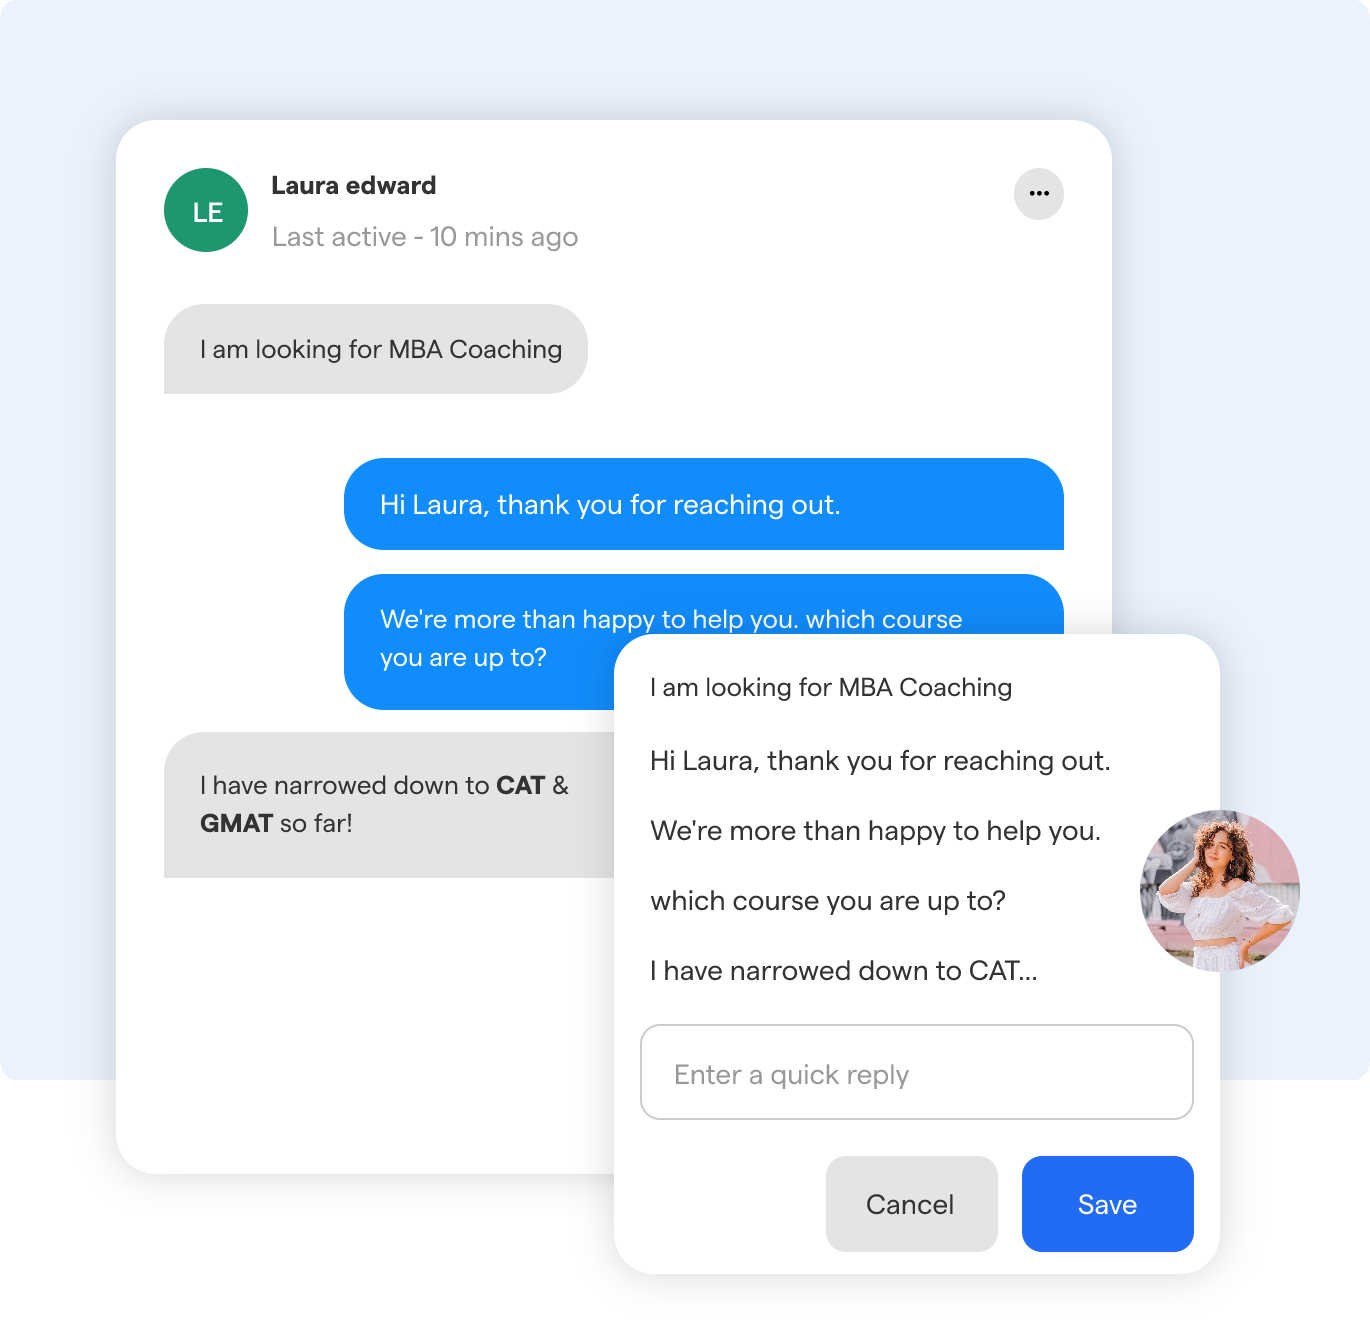 Understanding Lead Generation with Chatbots